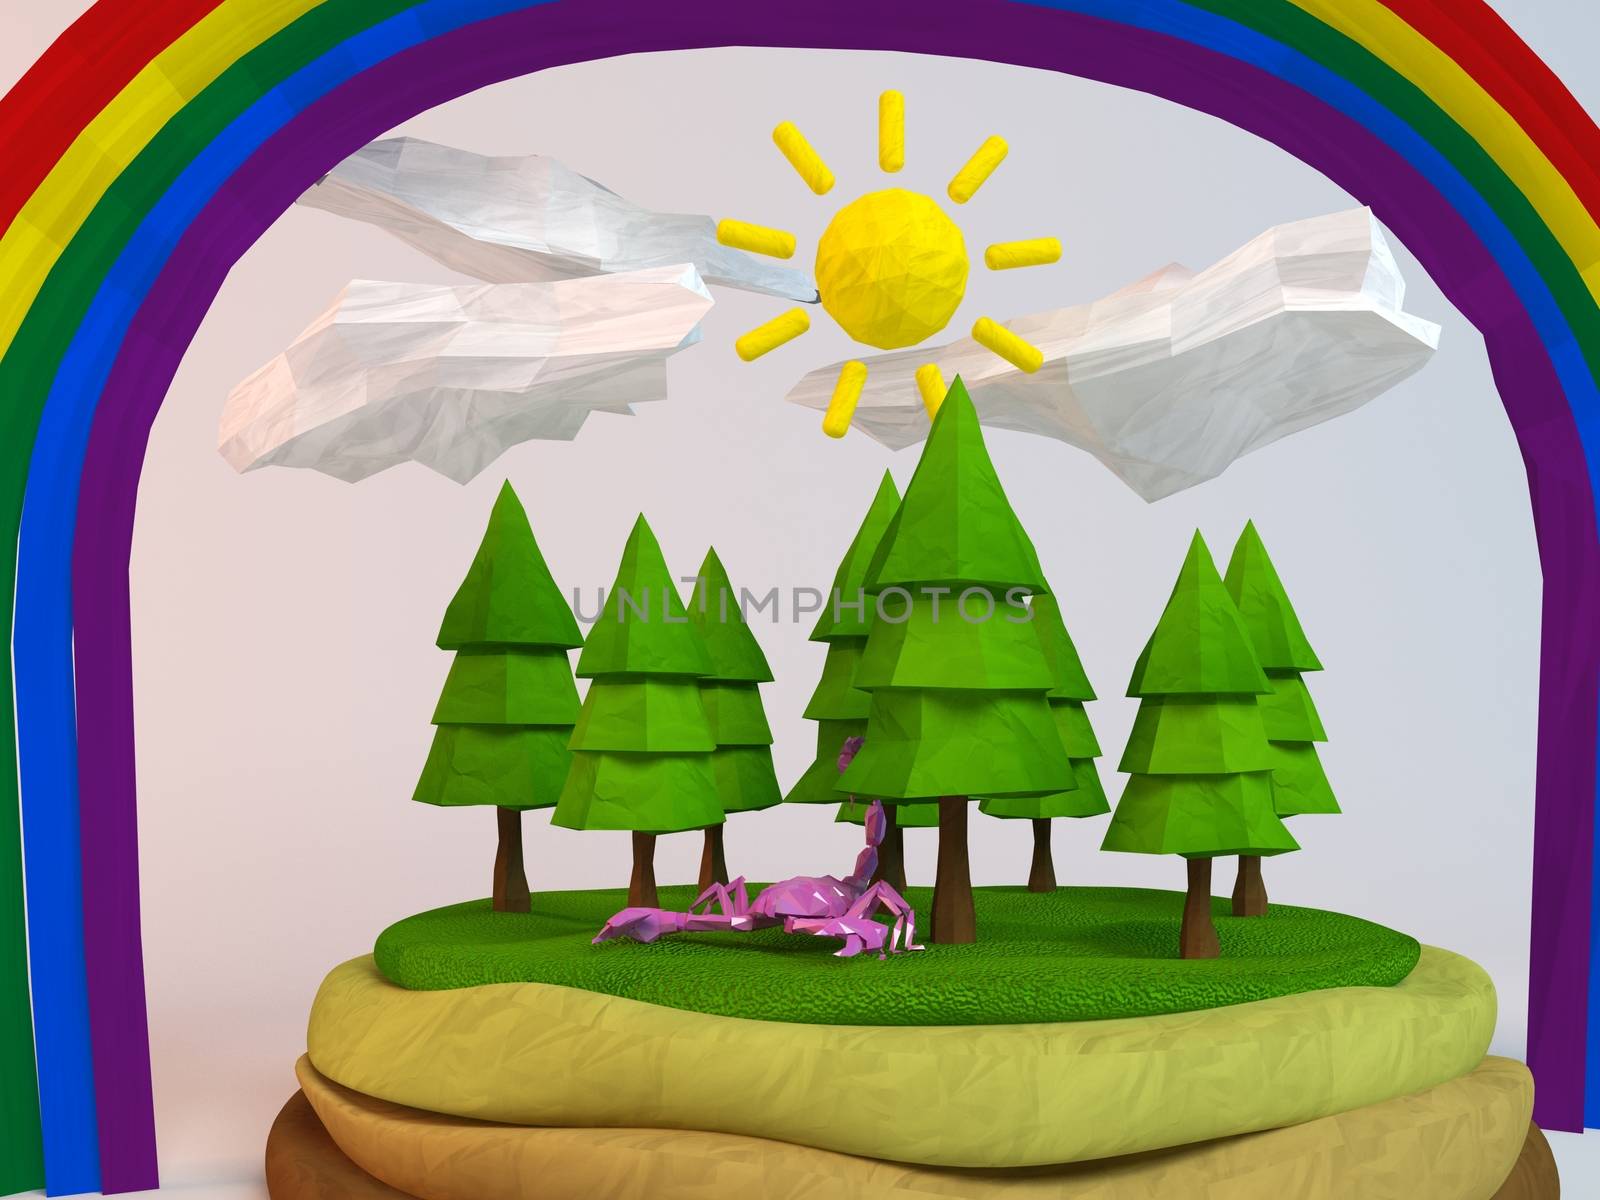 3d scorpion inside a low-poly green scene with sun, trees, clouds and a rainbow